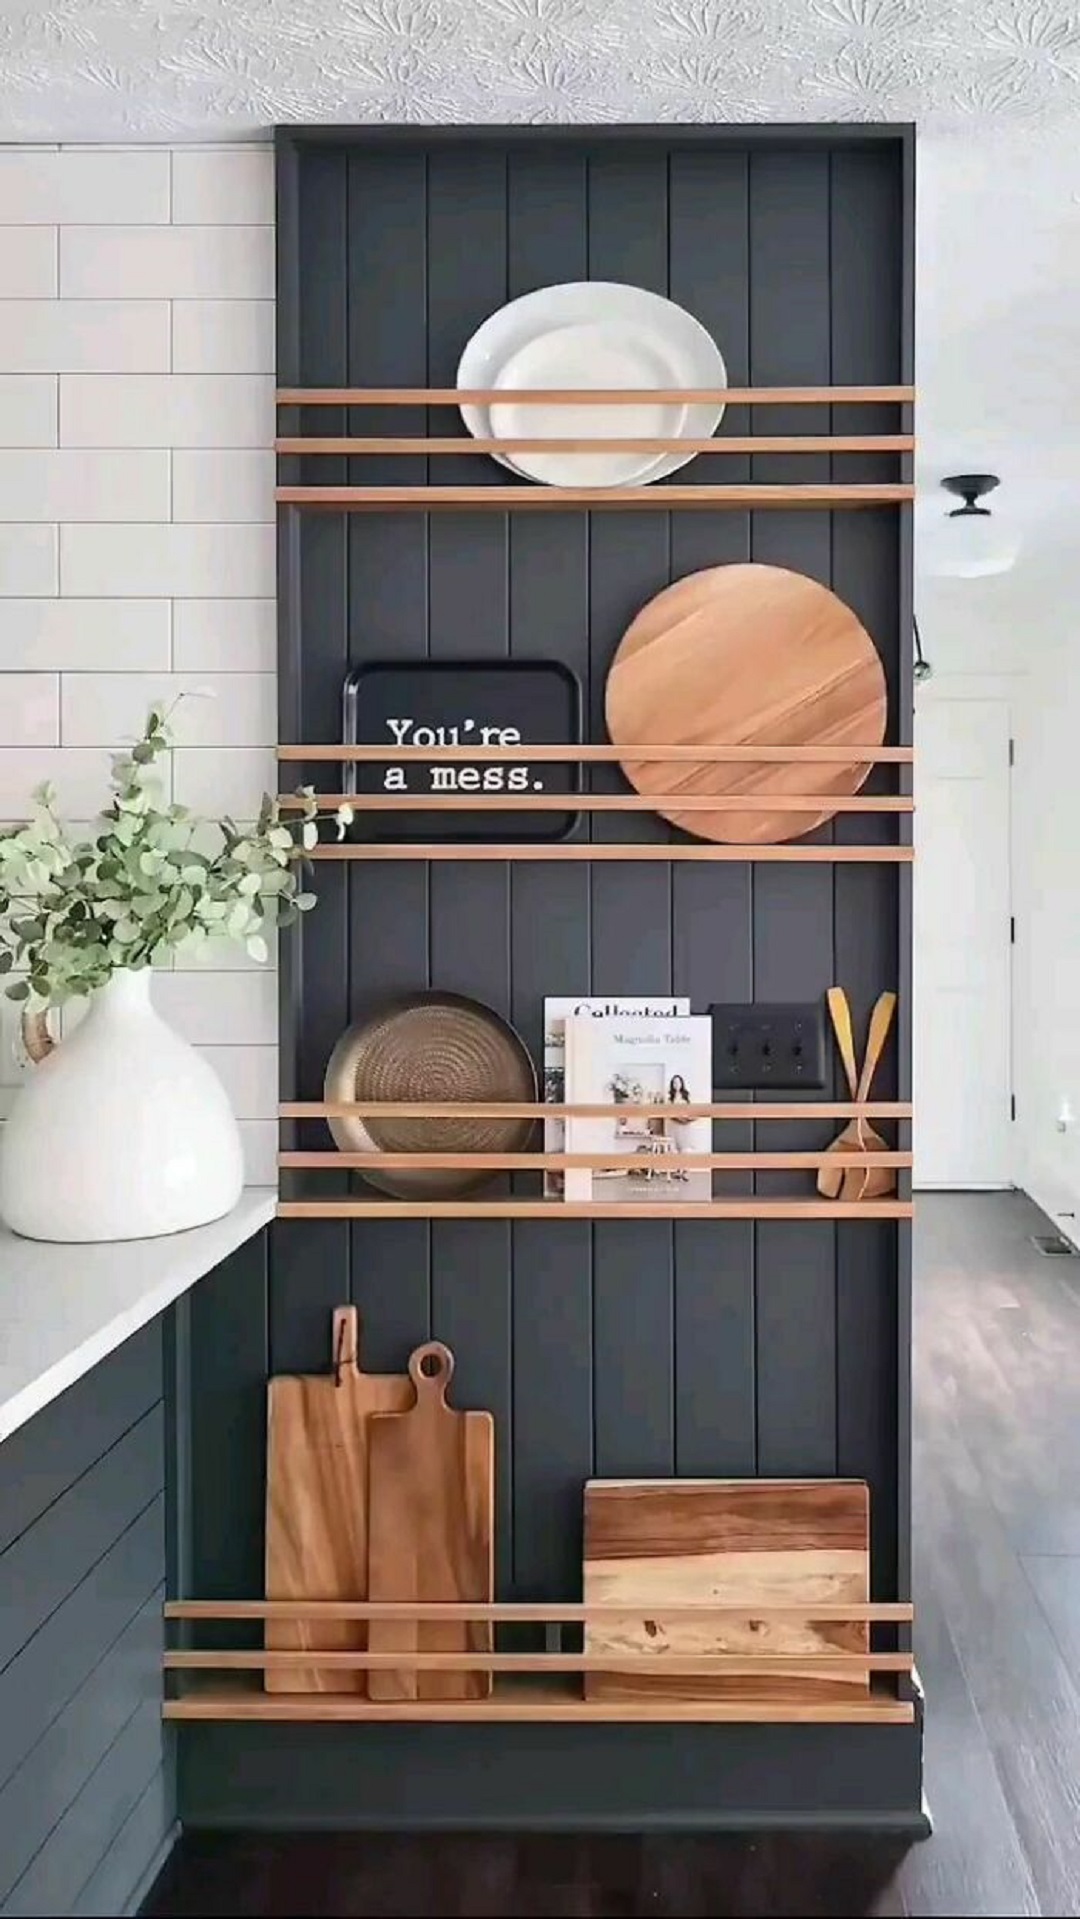 In Love With This Blank Wall Transformation Into A Lovely Display Area